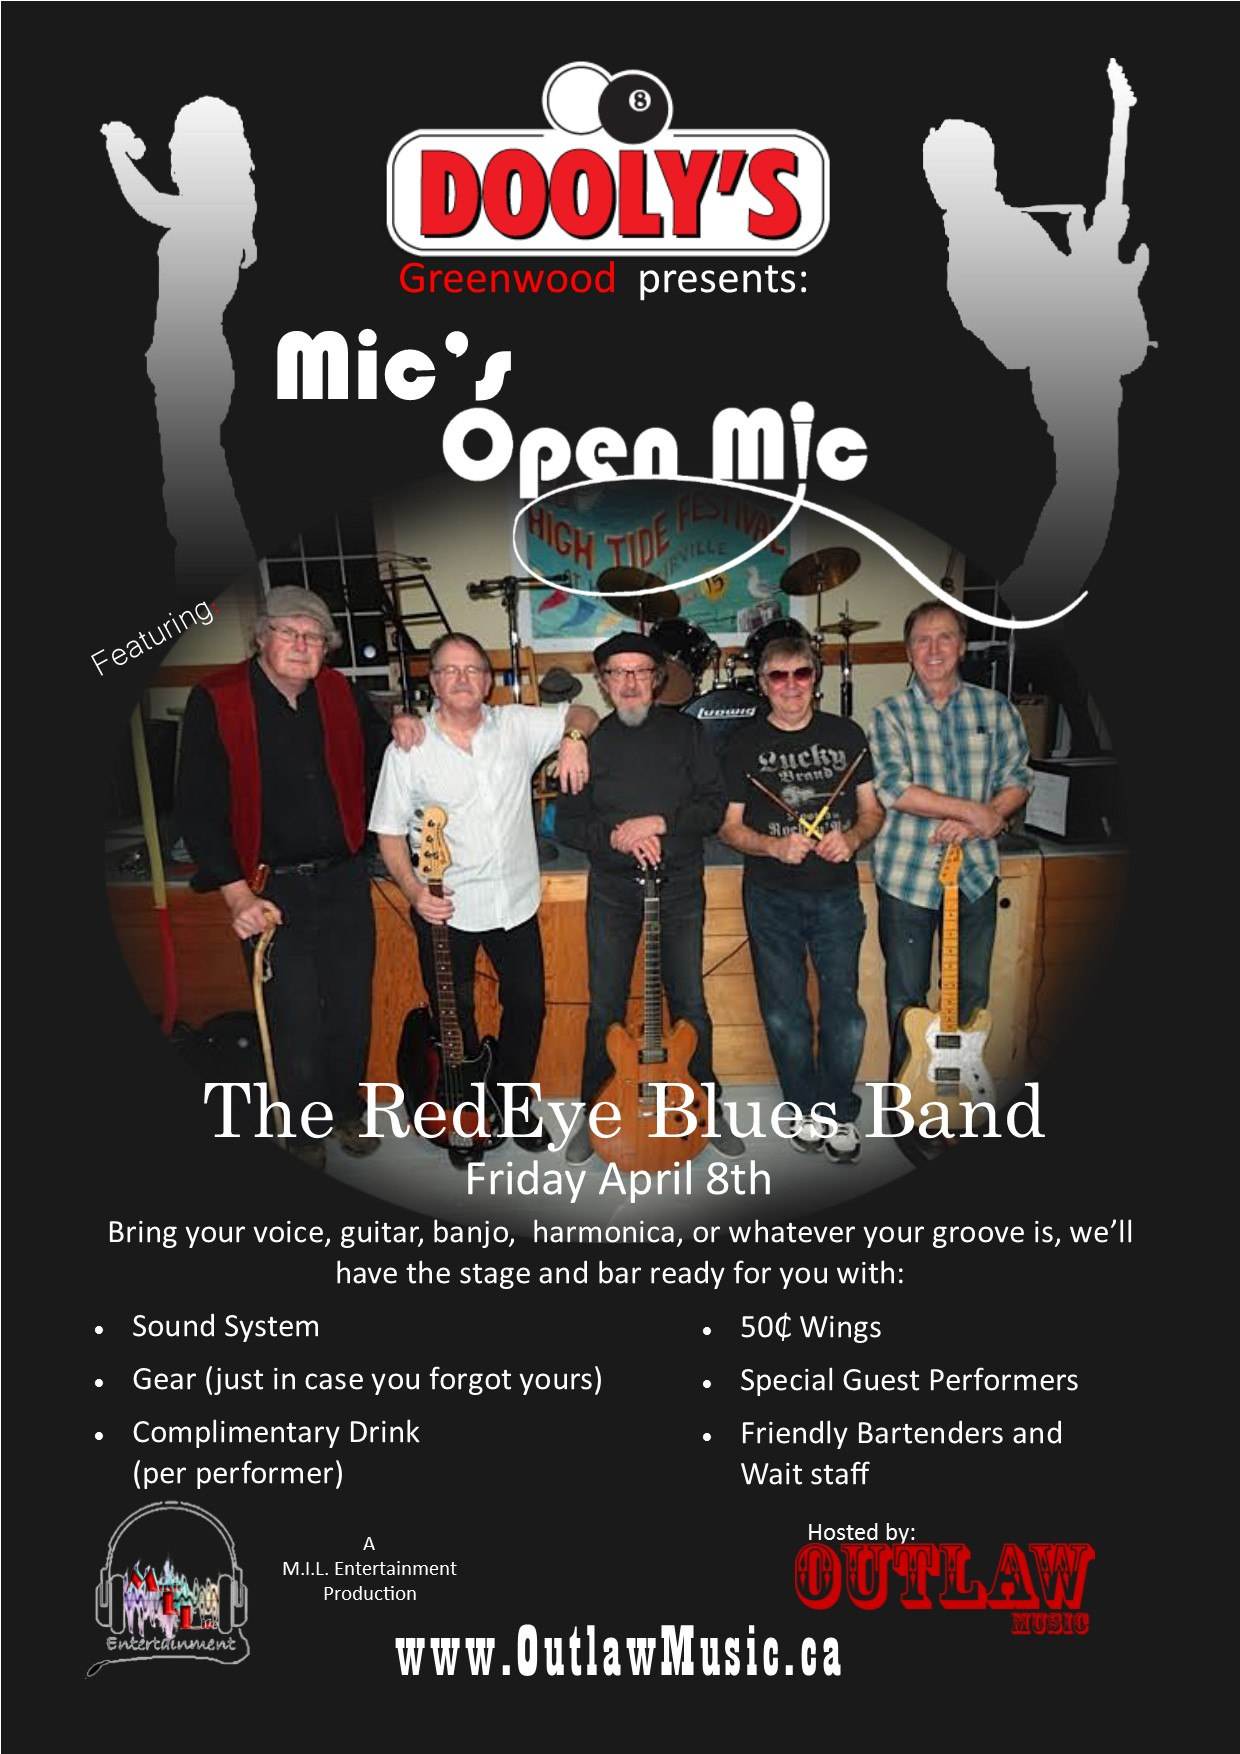 Open Mic with The RedEye Blues Band at Doolys, Greenwood (April 8, 2016